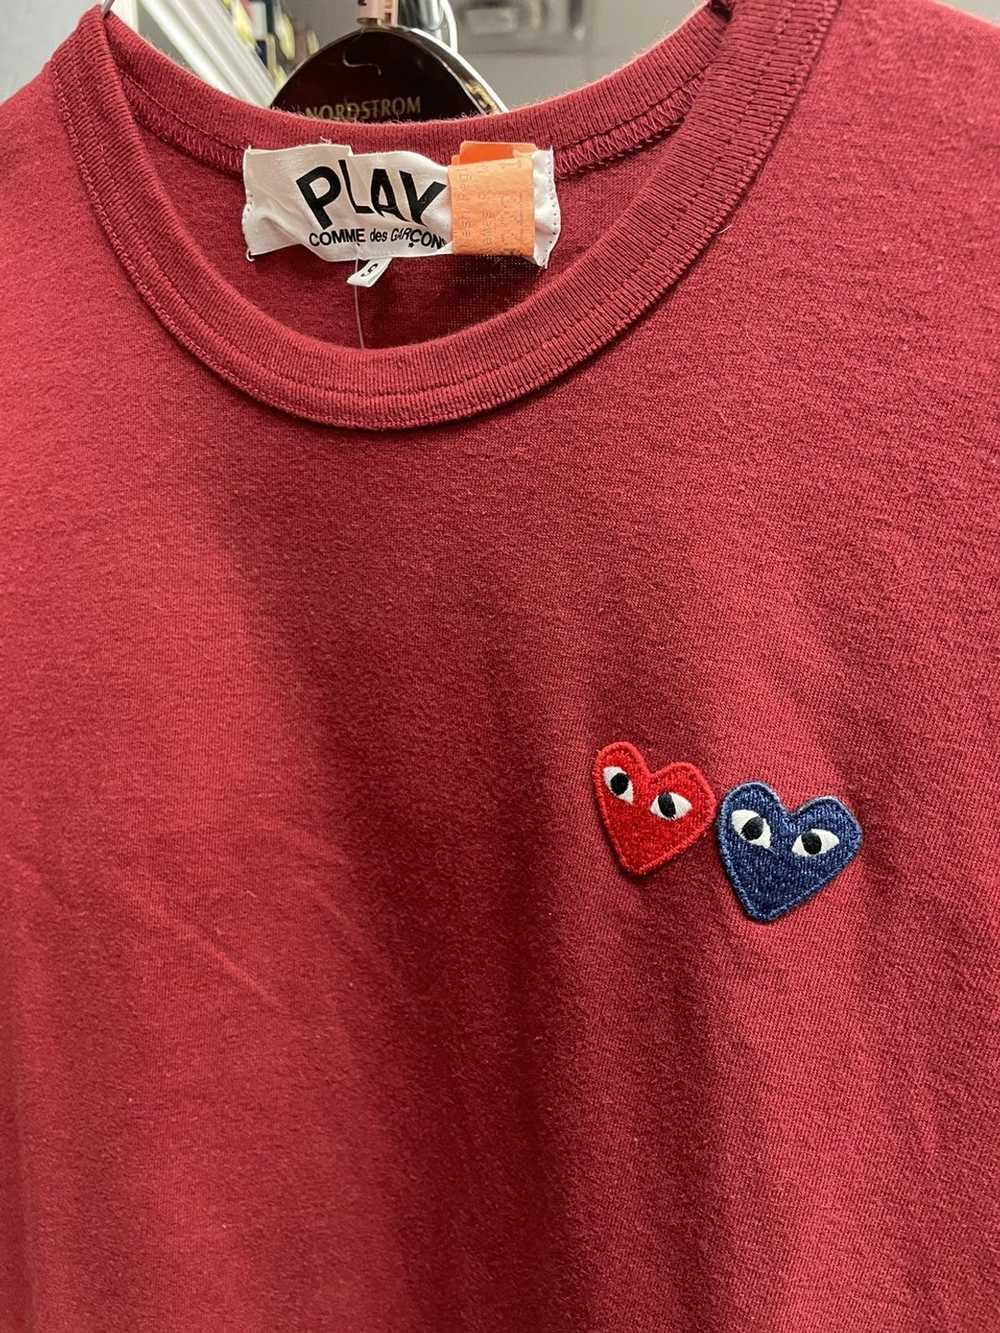 Comme des Garcons Red Cdg heart tee - image 5